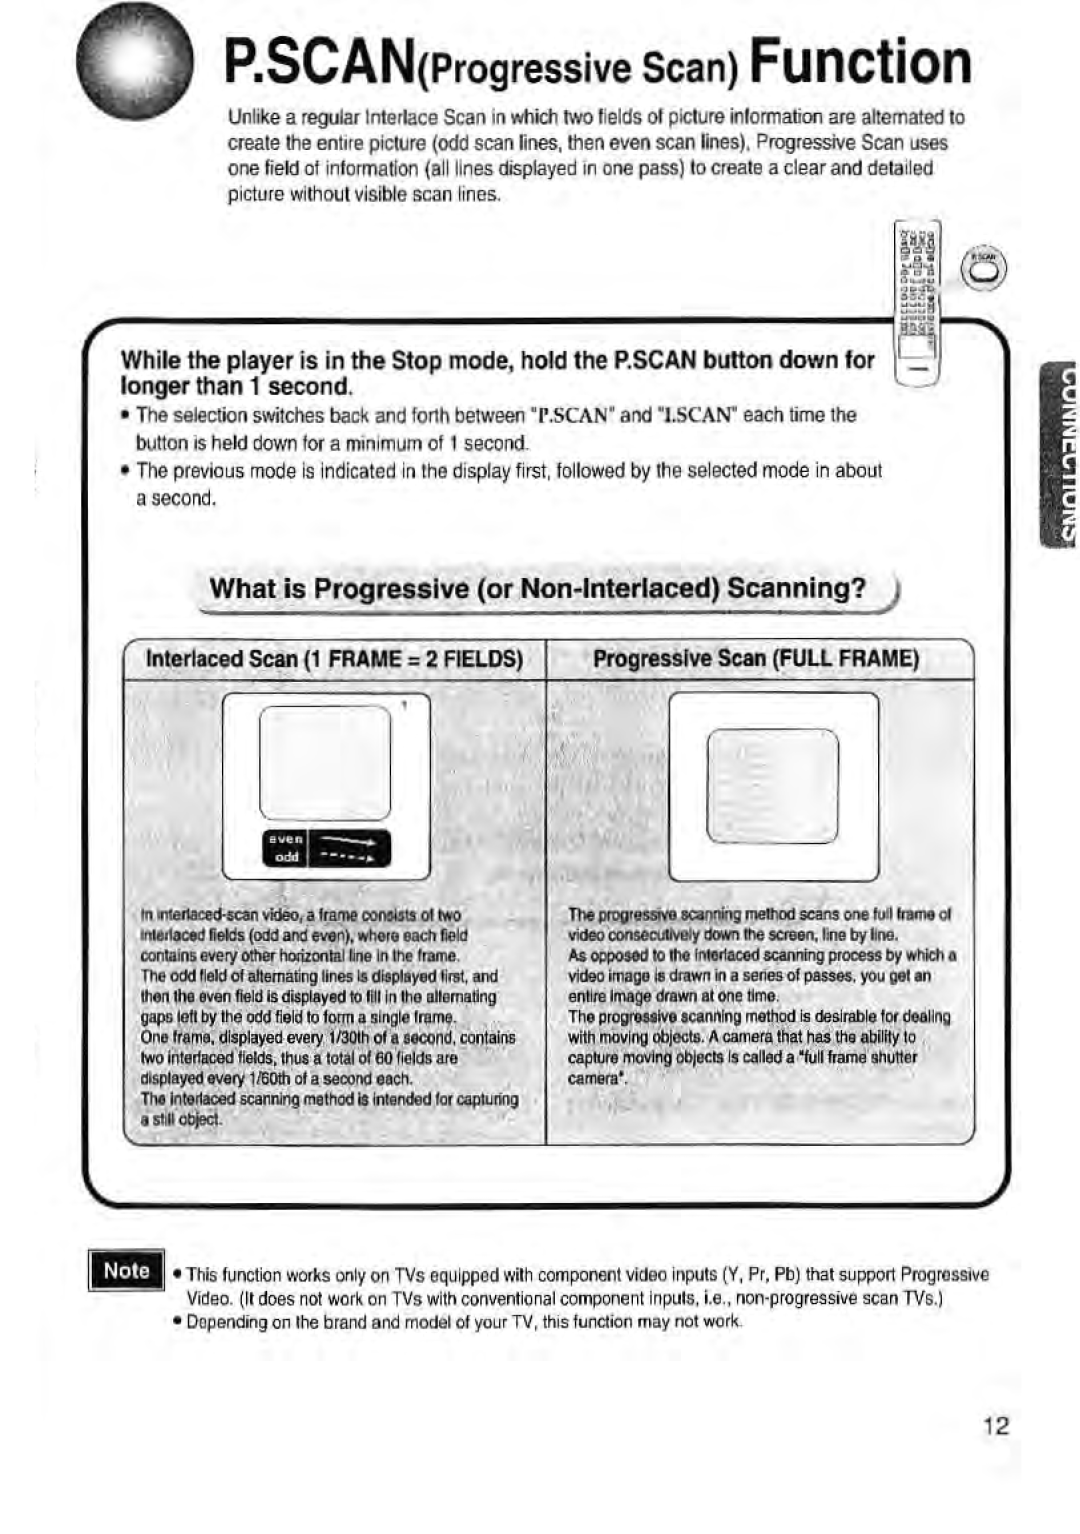 Toshiba SD-43HK owner manual What is Progressive or Non-Interlaced Scanning?, P. SCAN Progressive Scan Function 